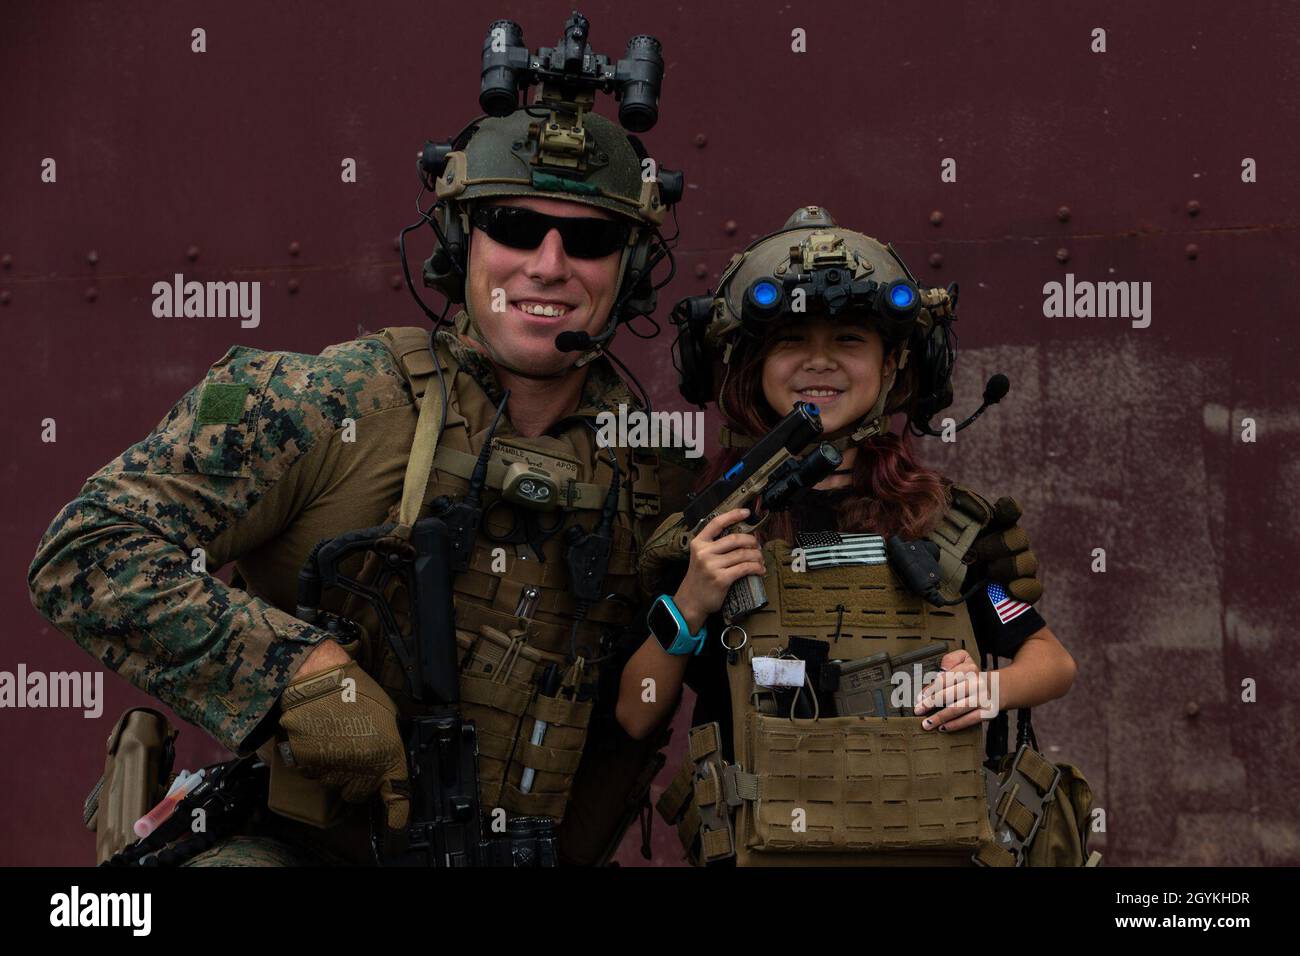 A Force Reconnaissance Marine with the 31st Marine Expeditionary Unit’s Maritime Raid Force poses for a photo with a child during a community interaction, tactical demonstration event in Kapolei, HI, Jan. 19, 2020. The 31st MEU, the Marine Corps’ only continuously forward-deployed MEU, provides a flexible and lethal force ready to perform a wide range of military operations as the premier crisis response force in the Indo-Pacific region. (Official U.S. Marine Corps photo by Cpl. Isaac Cantrell) Stock Photo